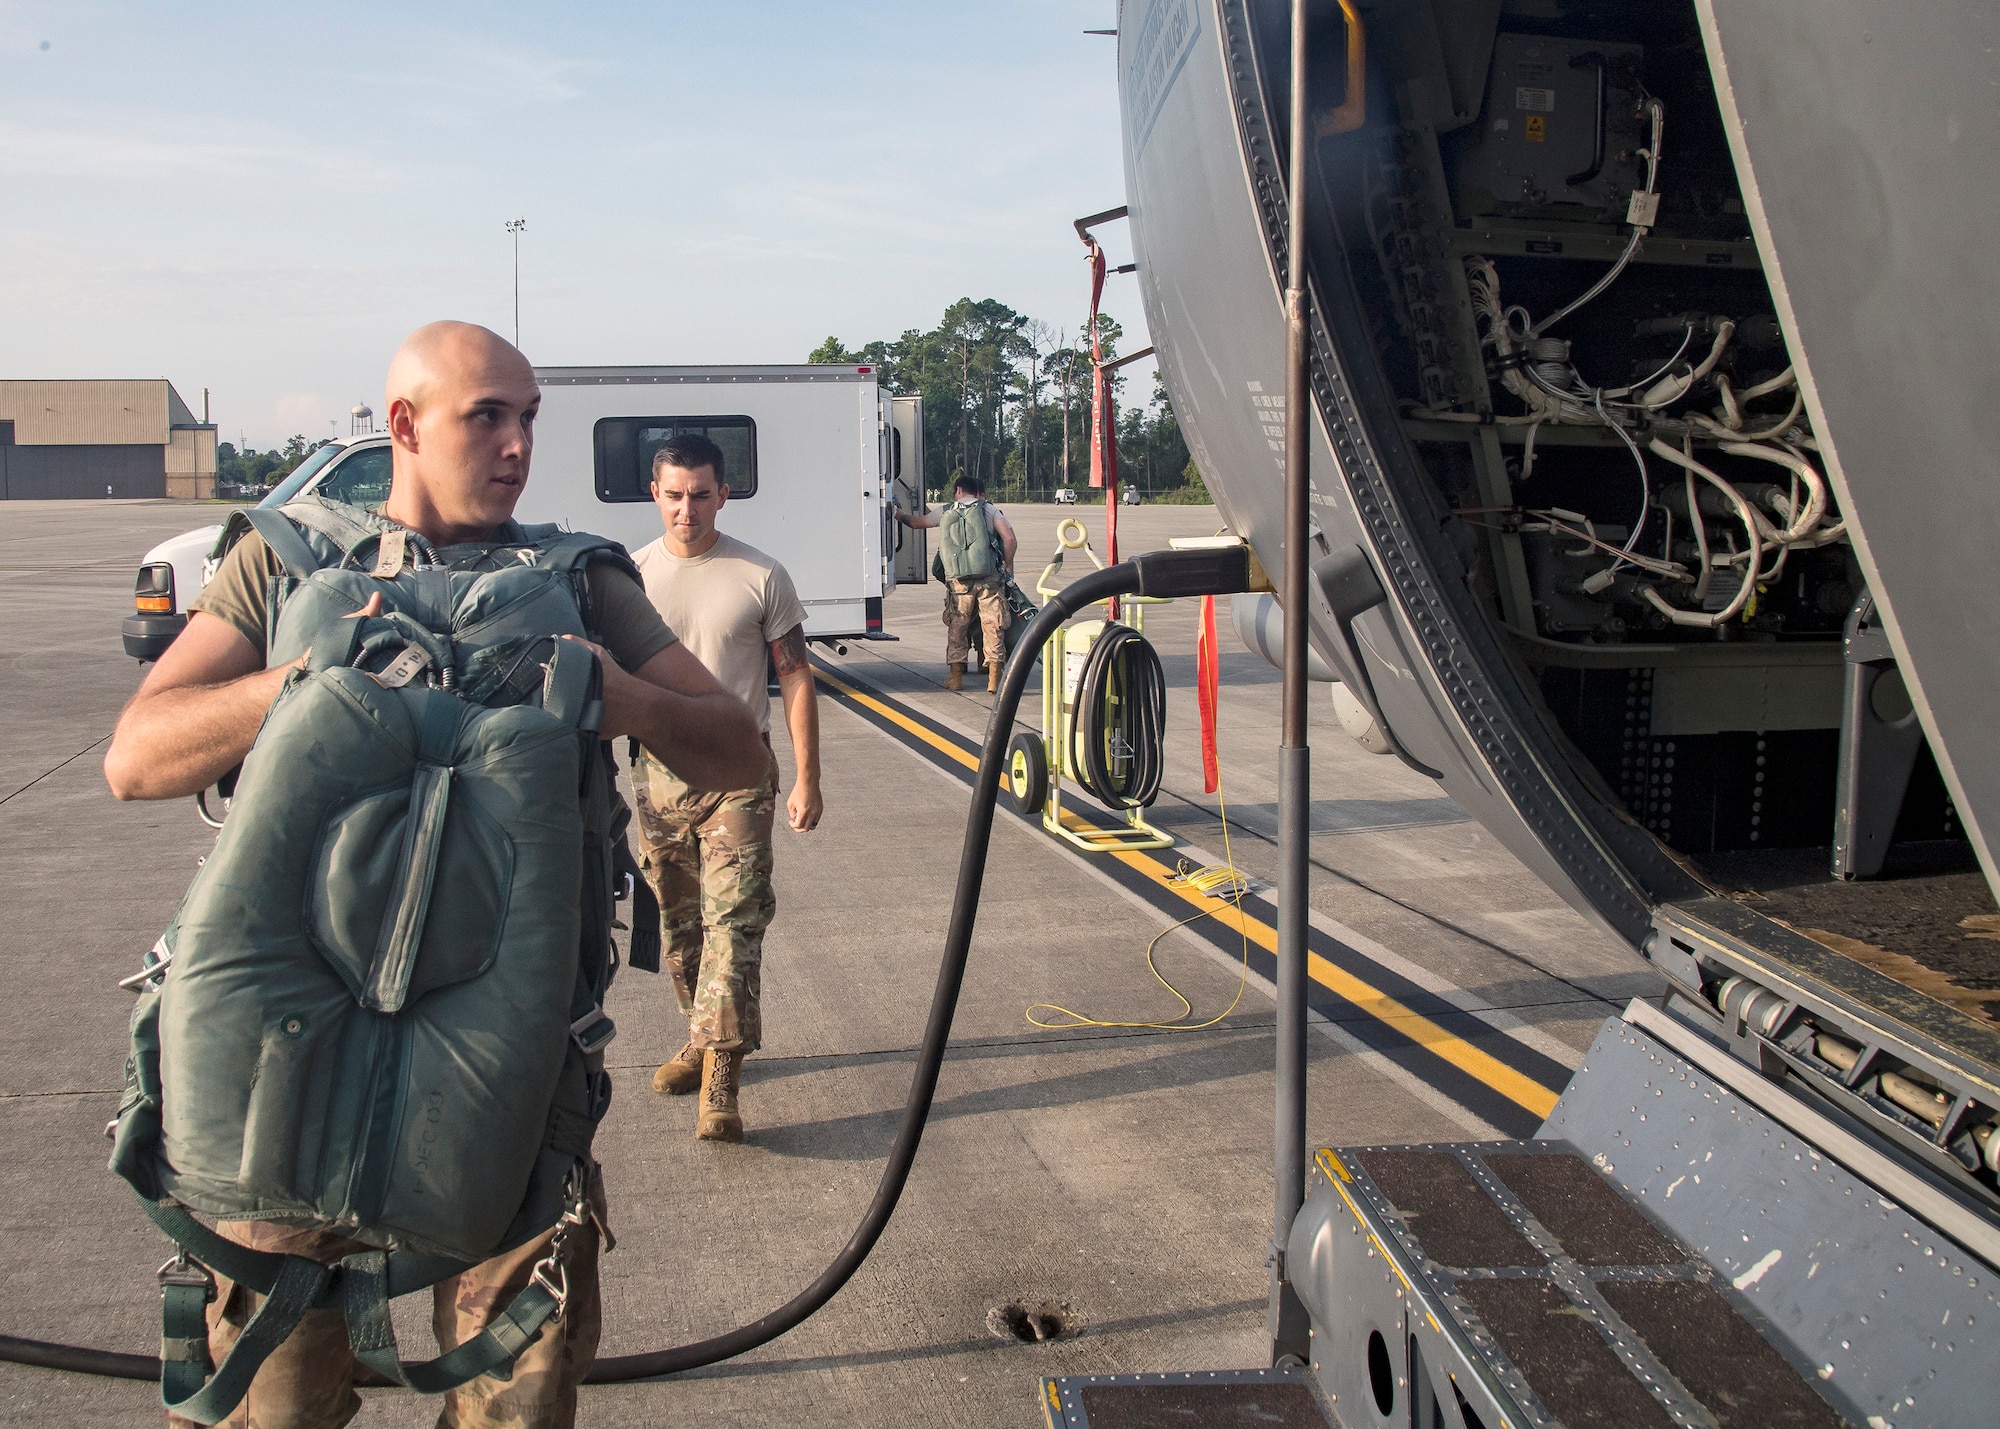 Airman 1st Class Gary Scott, left, 347 Operations Support Squadron aircrew flight equipment (AFE) apprentice, carries AFE onto an HC-130J Combat King II, Aug. 13, 2019, at Moody Air Force Base, Ga. Airmen from the 71st Aircraft Maintenance Unit and other supporting units perform various tasks prior to takeoff to ensure the aircraft is performing optimally to complete its mission of supporting the 71st Rescue Squadron. Those tasks consist of: pre-flight inspection, securing equipment, removing plugs and cover, repairing any problems found during crew pre-flight checks as well as marshaling the aircraft for takeoff. (U.S. Air Force photo by Airman 1st Class Eugene Oliver)